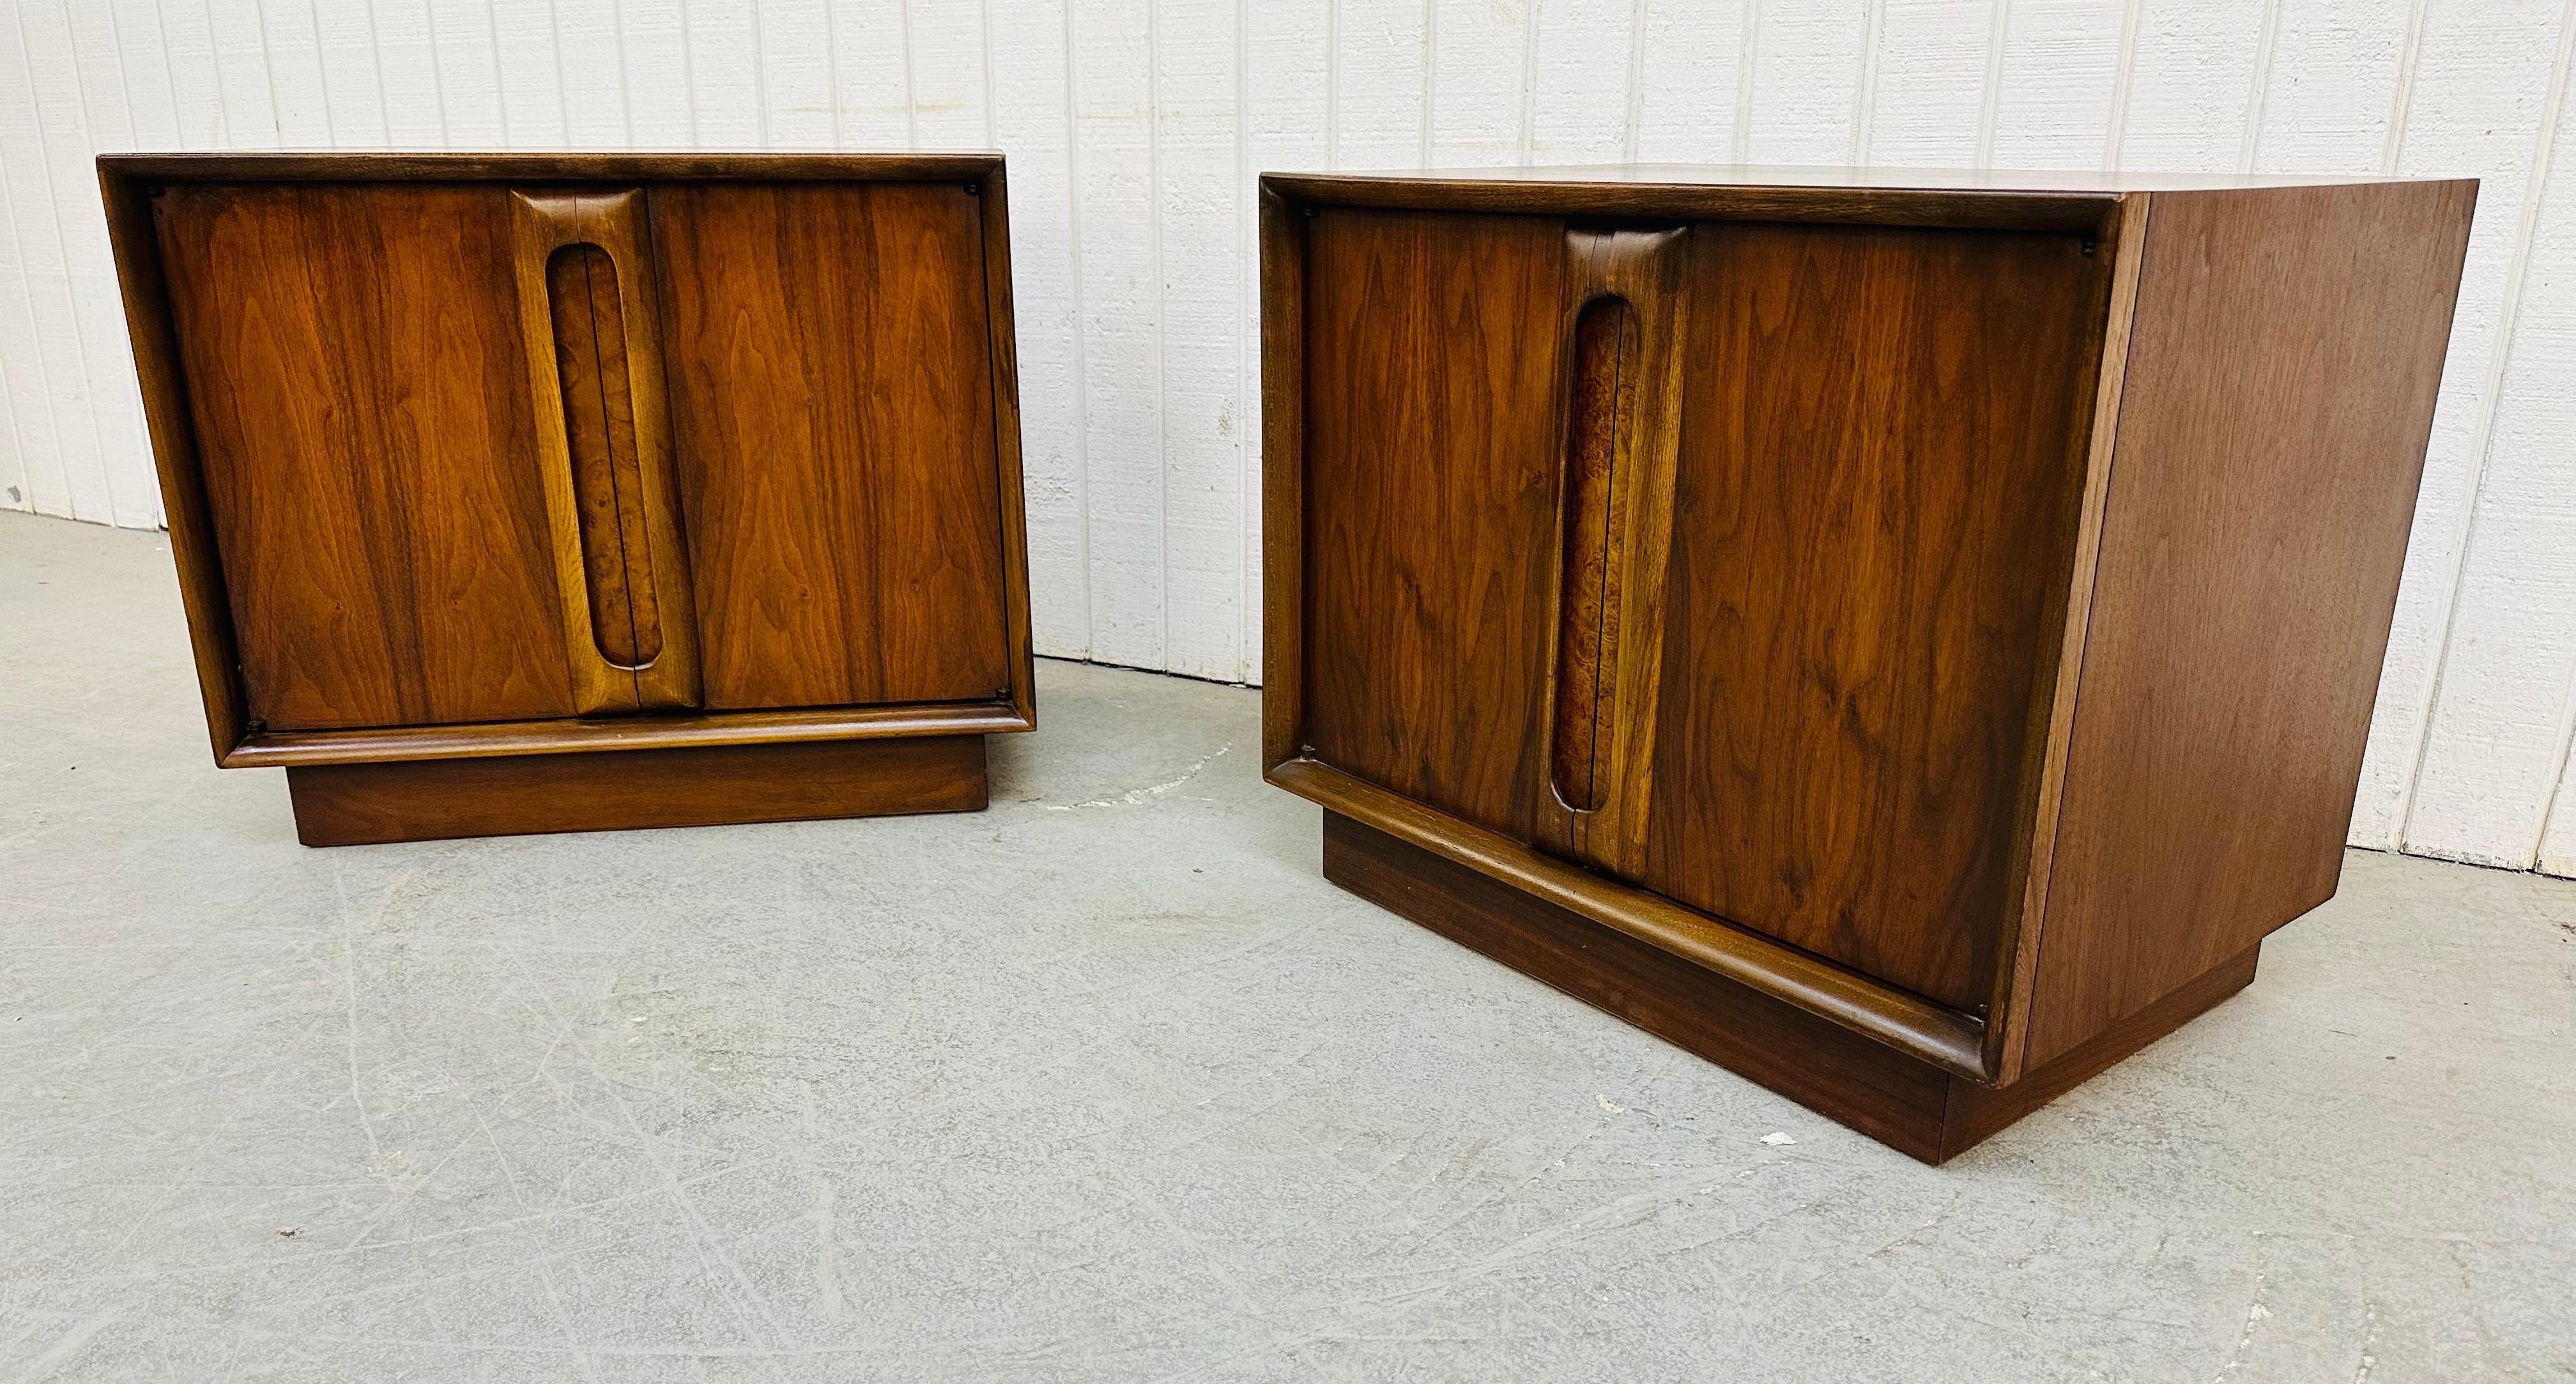 This listing is for a pair of Mid-Century Modern Lane Walnut Cube Nightstands. Featuring a straight line design, cube shaped on a plinth base, two doors with wood handles that open up to storage space, burled accent at the edge of each door, and a